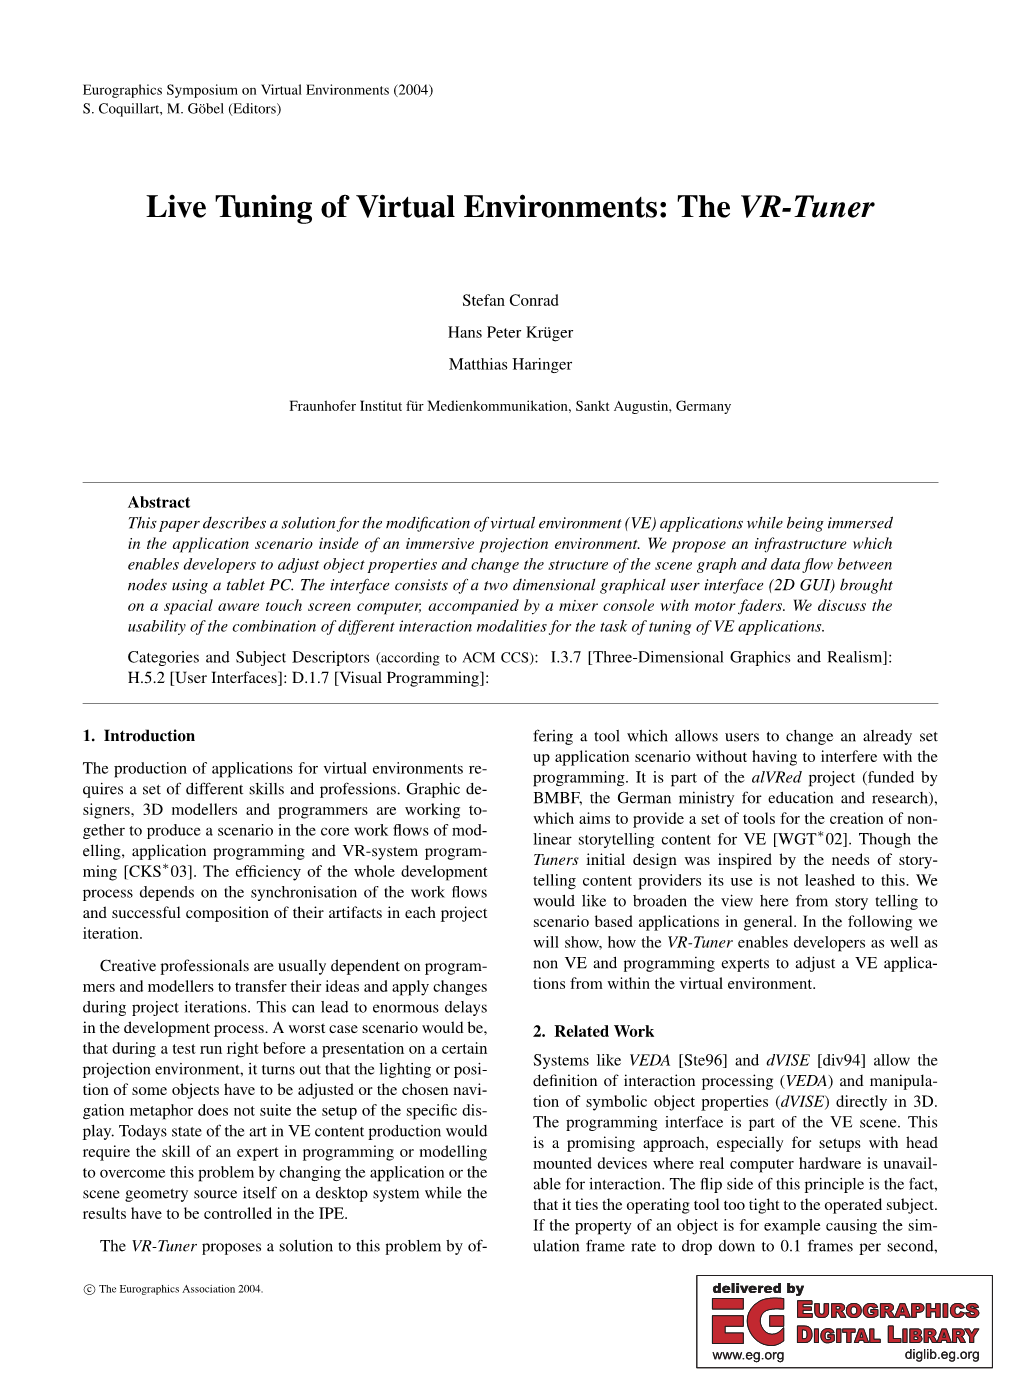 Live Tuning of Virtual Environments: the VR-Tuner